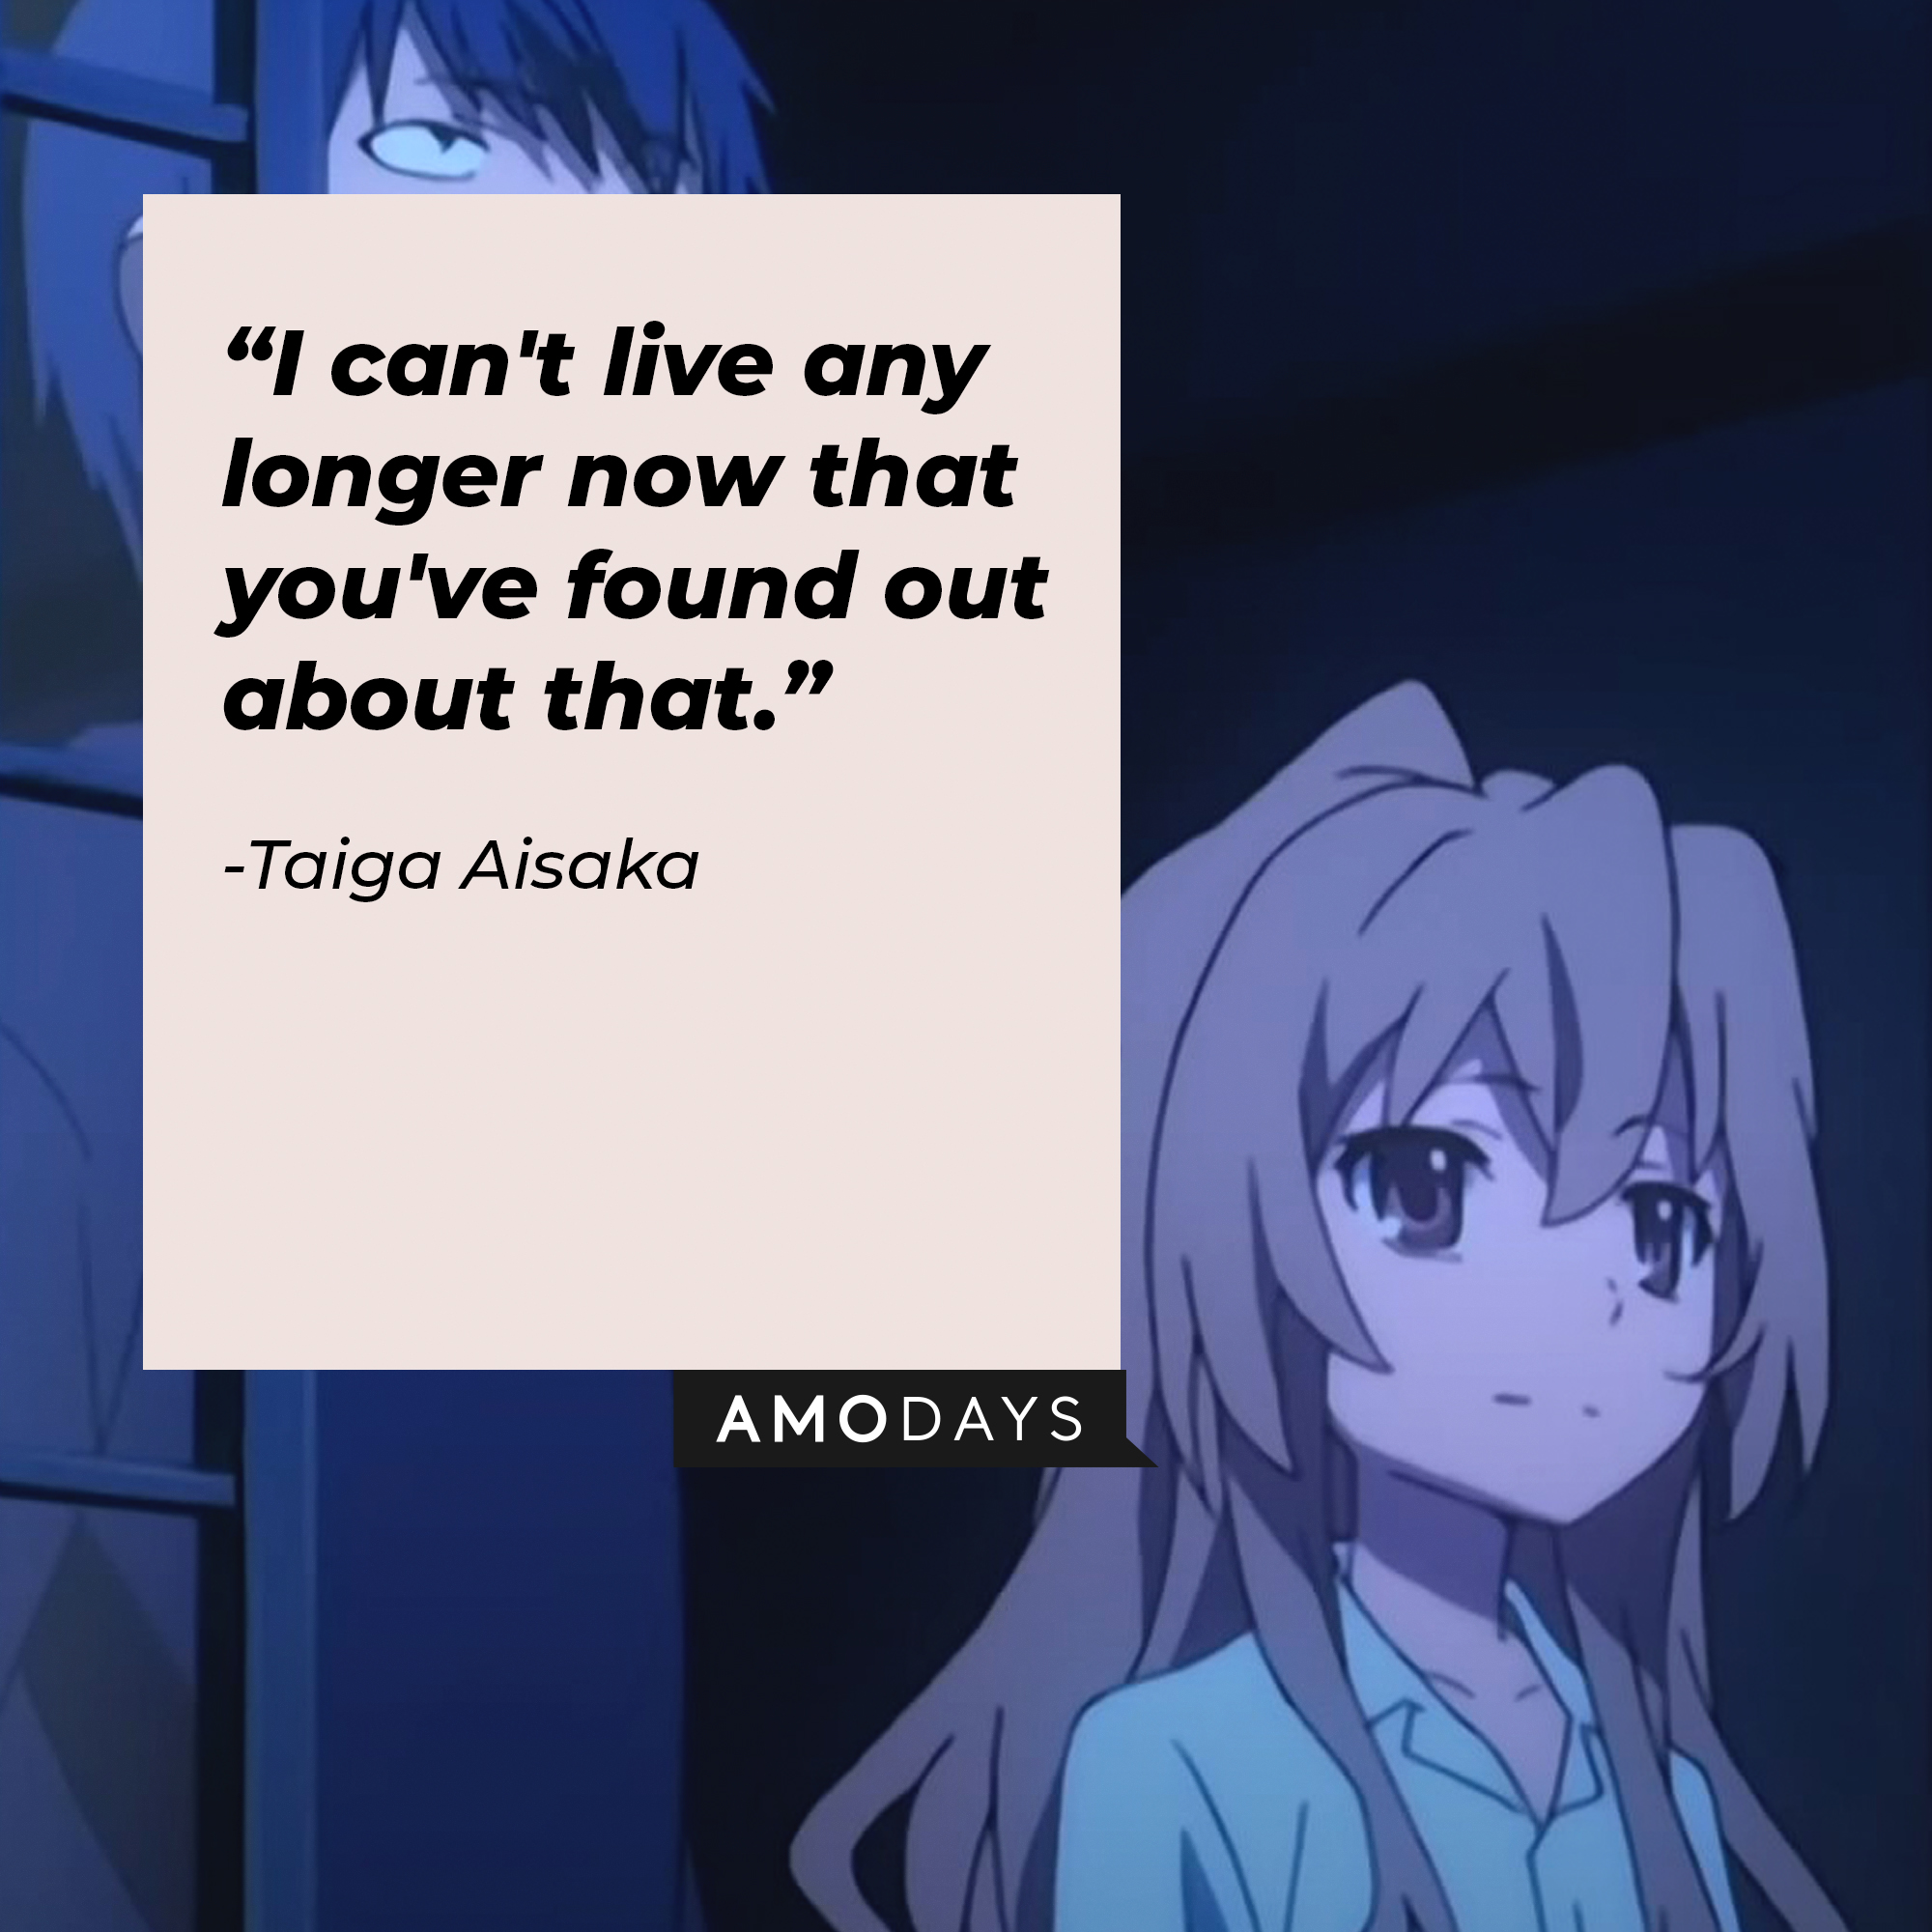 A picture of the animated character Taiga Aisaka with a quote by her: “I can't live any longer now that you've found out about that.” | Image: facebook.com/toradoraoff